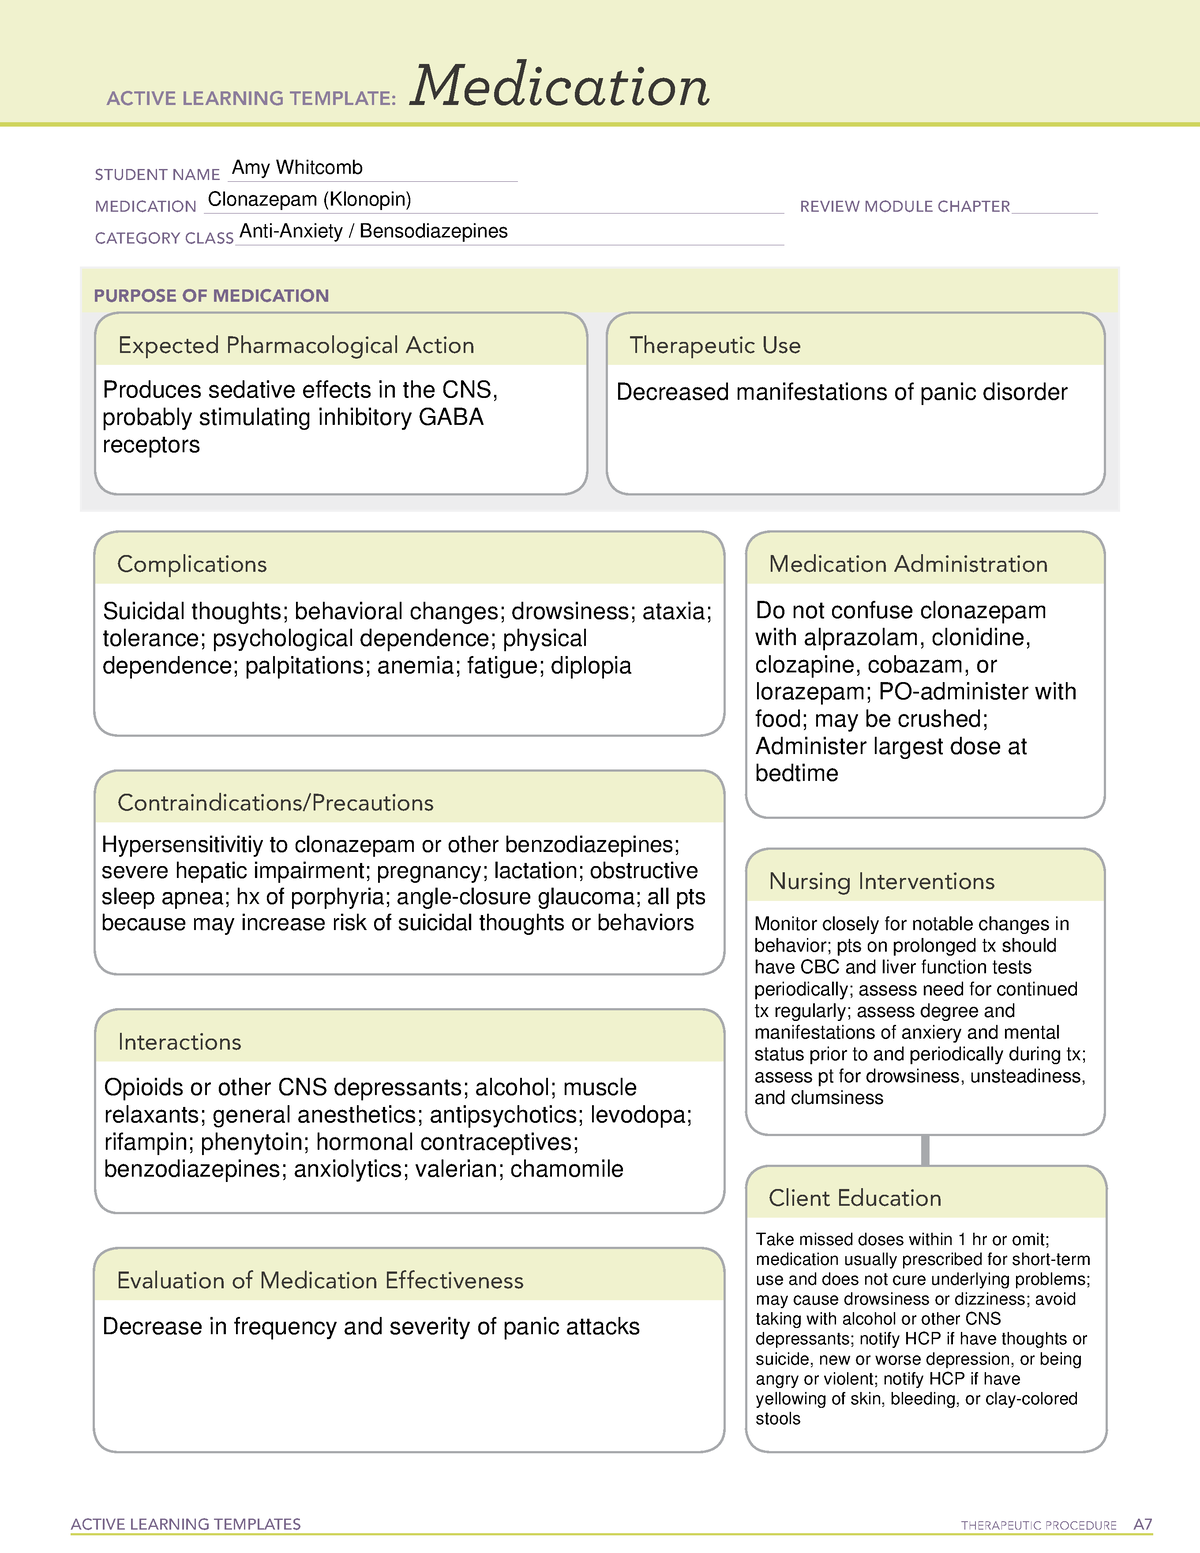 ATI Clonazepam Medication Sheet ACTIVE LEARNING TEMPLATES THERAPEUTIC